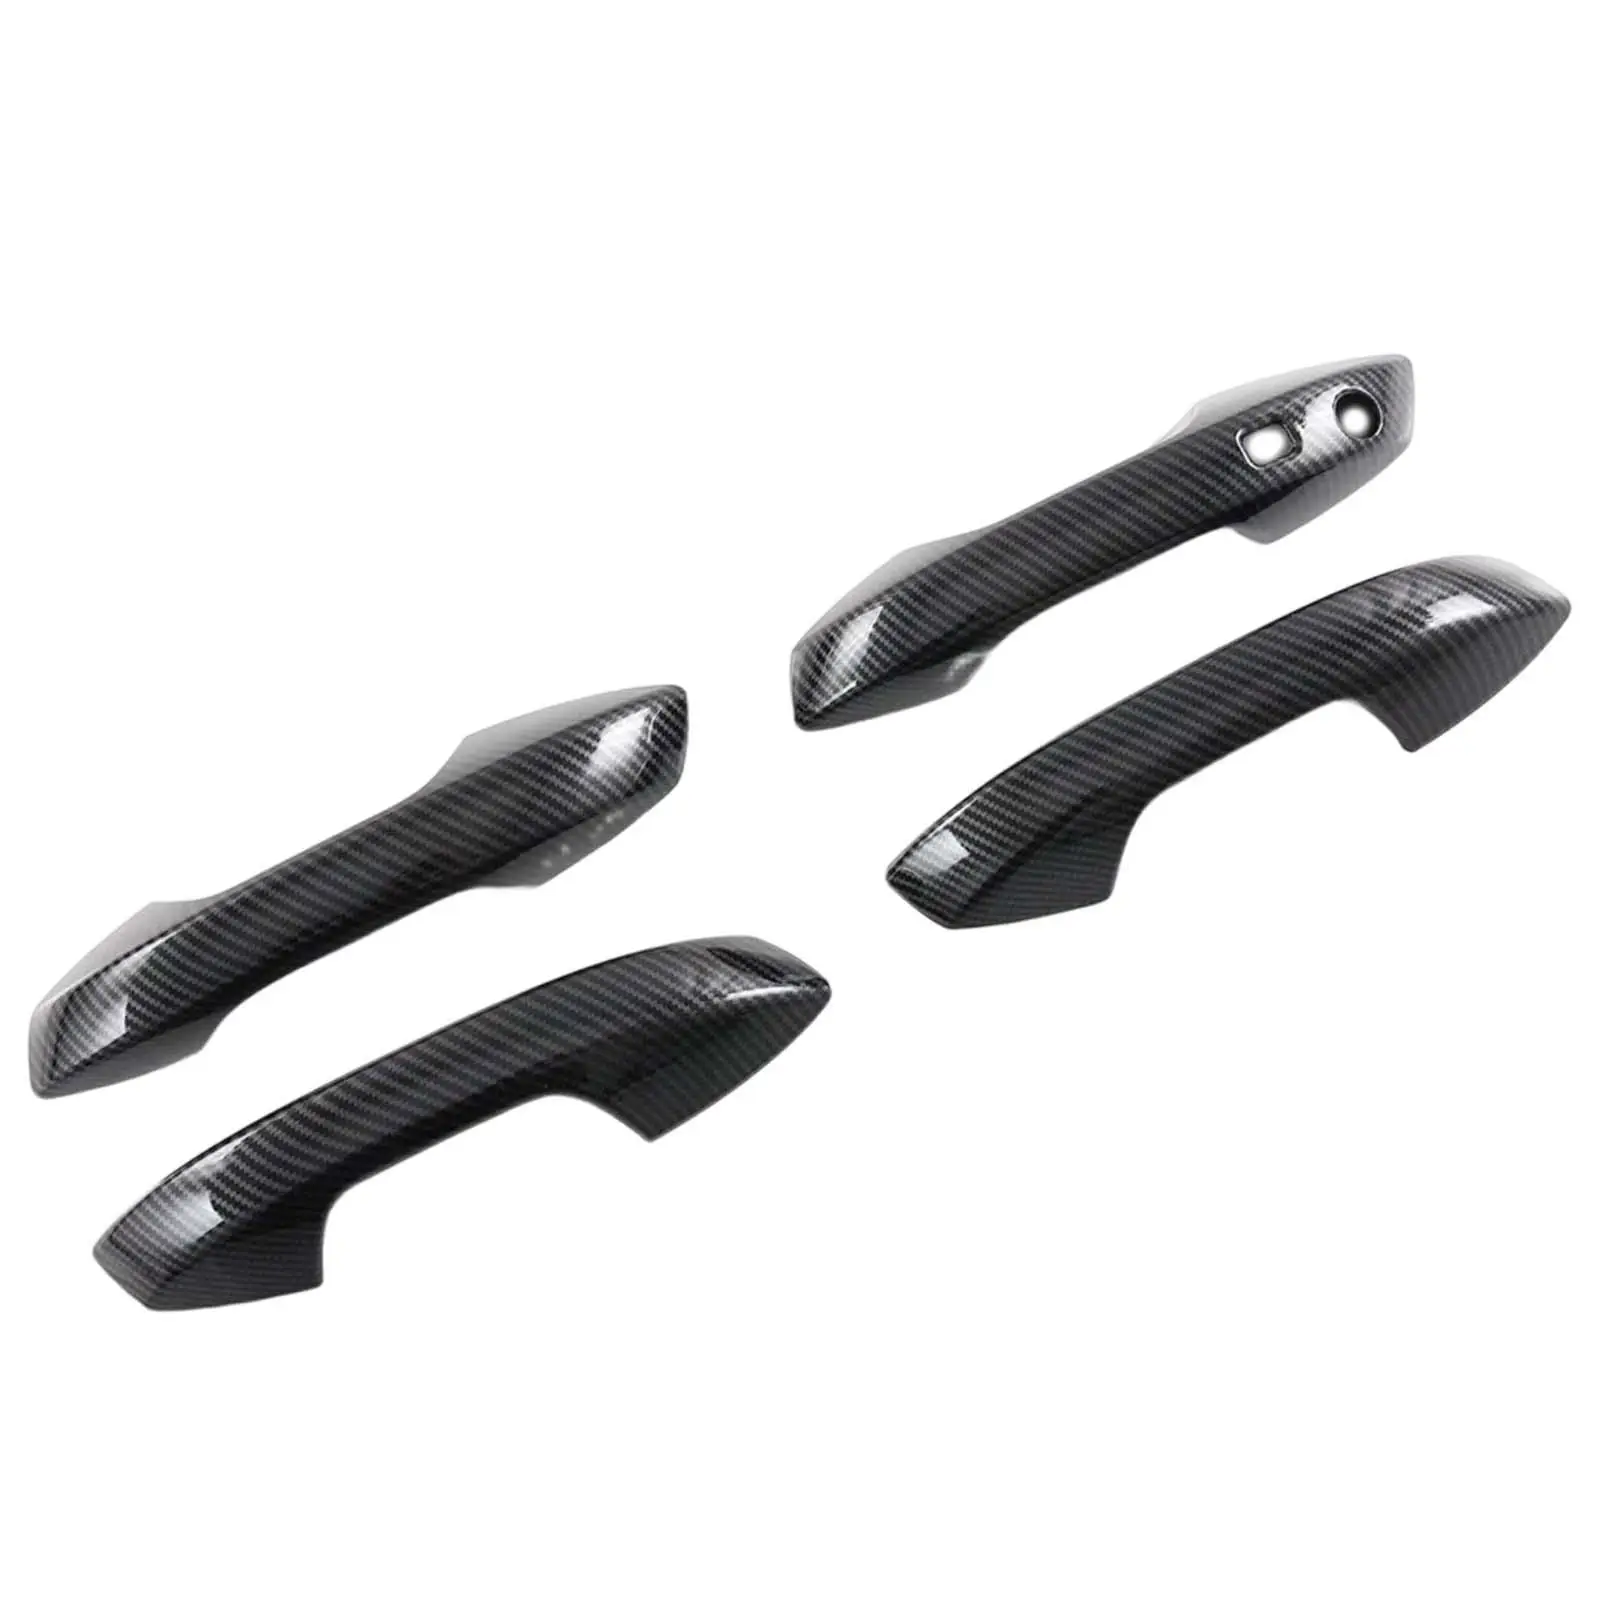 4Pcs Car Door Handle Protective Cover Scratch Guard Durable Parts Decorative Replacement Trim Protector for Byd Yuan Plus